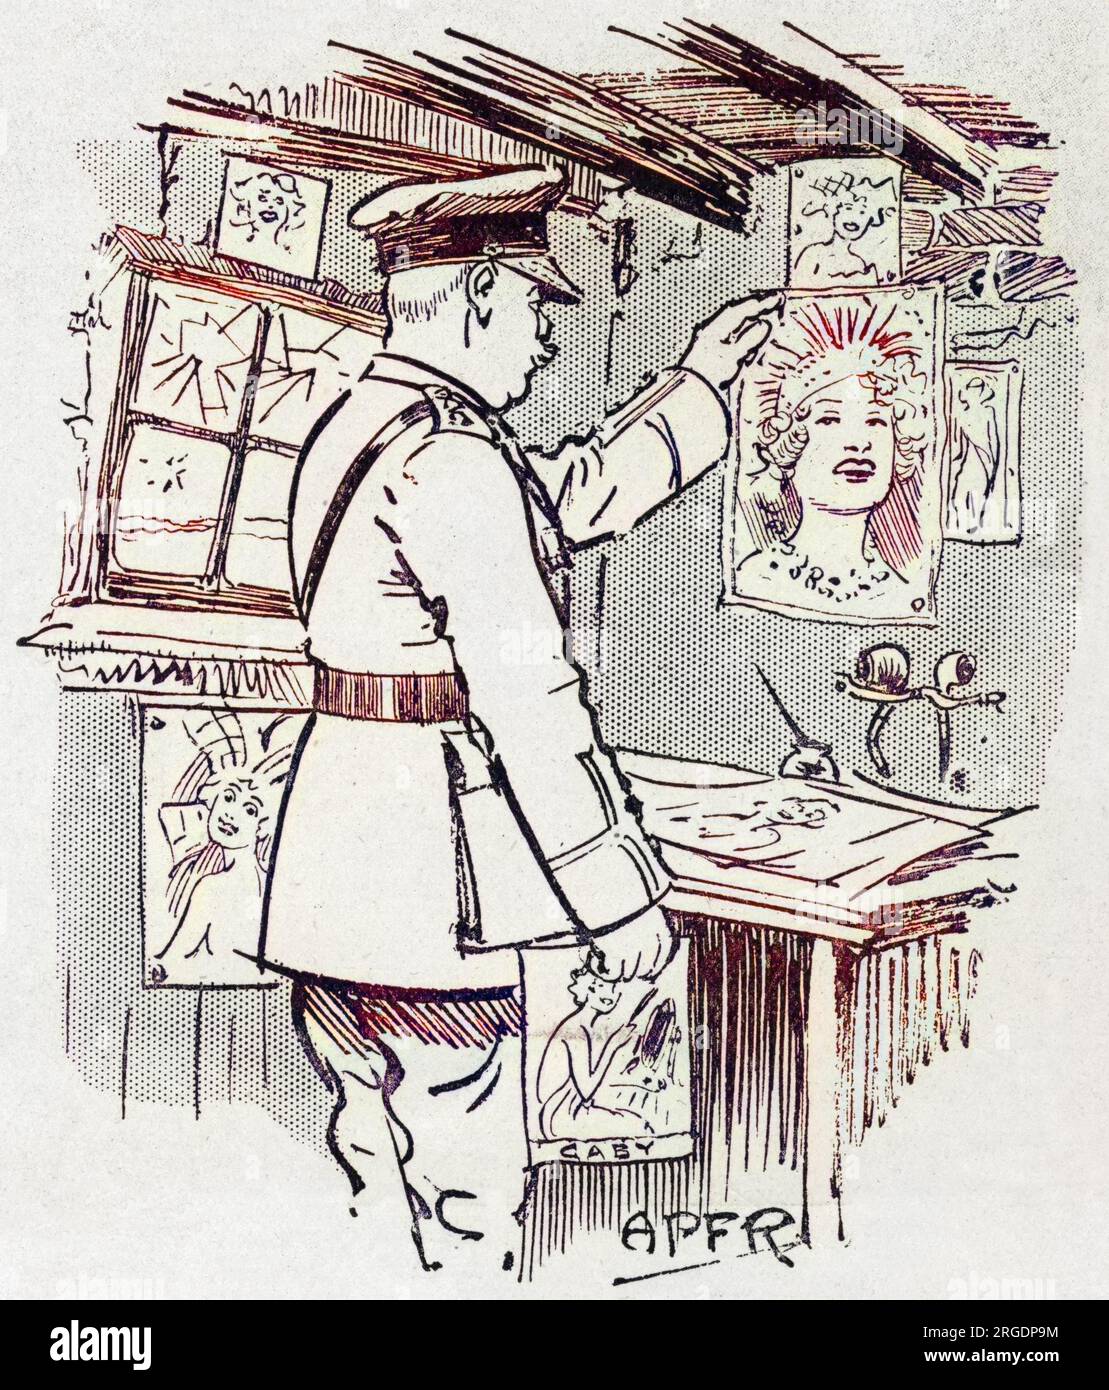 A military officer, second in command, collecting images of the actress Gaby Deslys (1881-1920), as a way of improving the morale while fighting abroad. Stock Photo